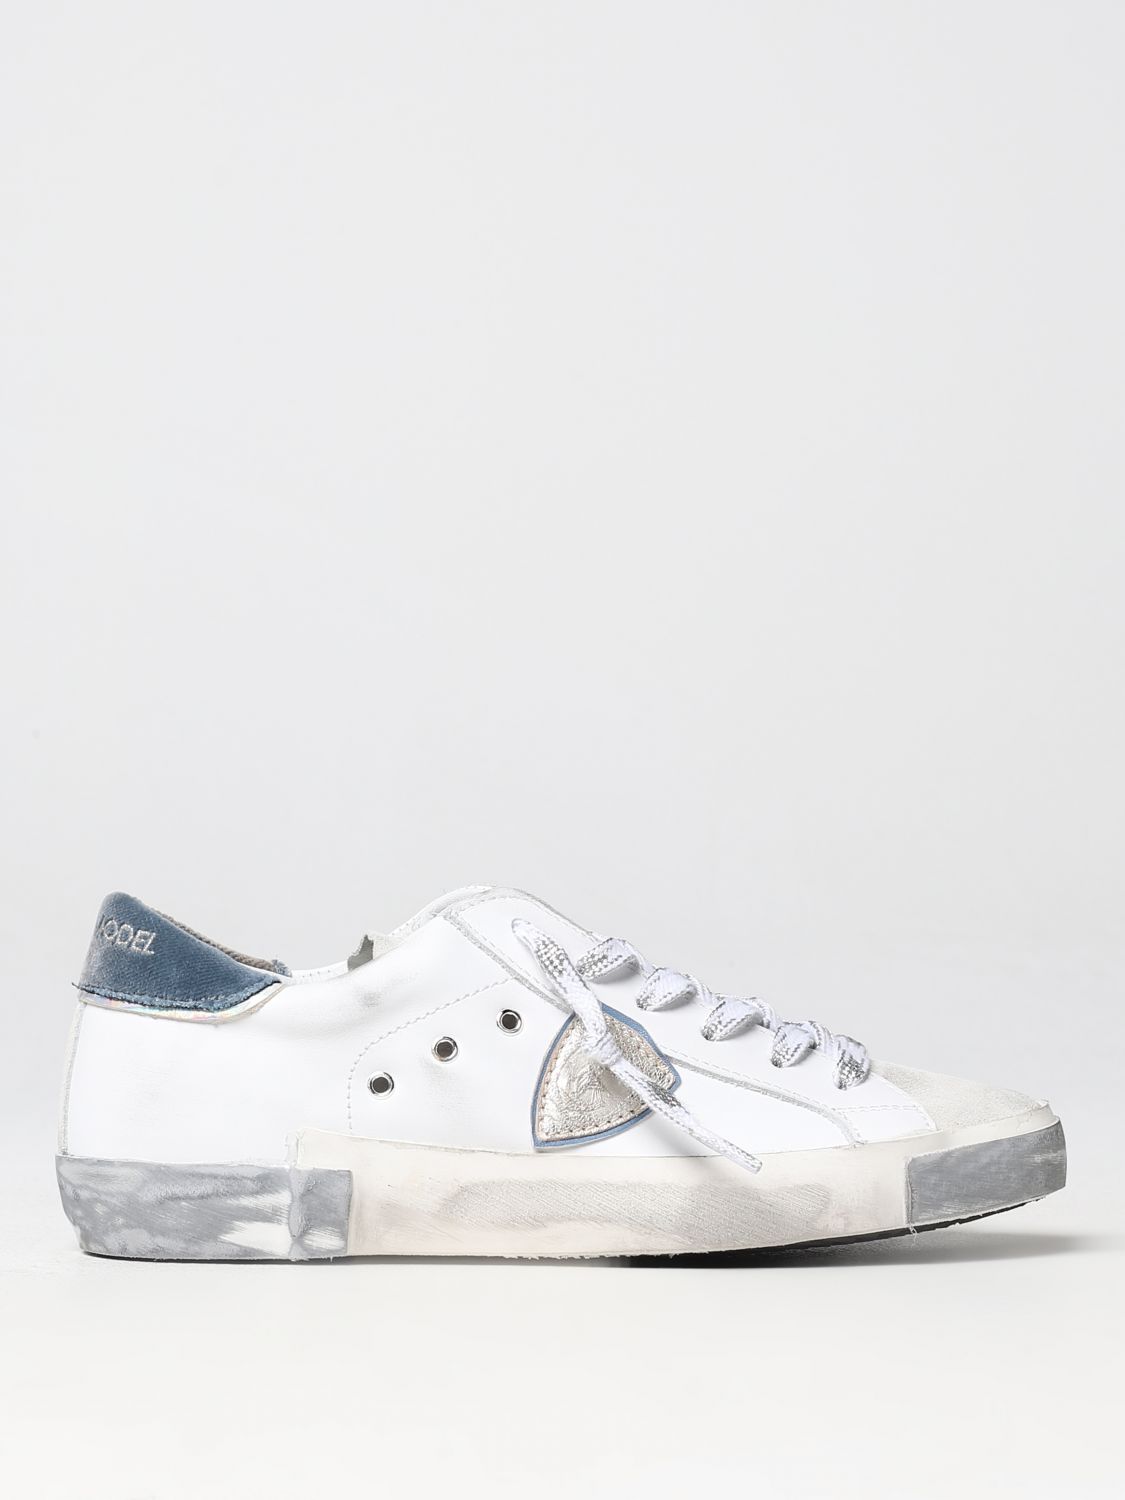 Philippe Model Sneakers PHILIPPE MODEL Woman colour White